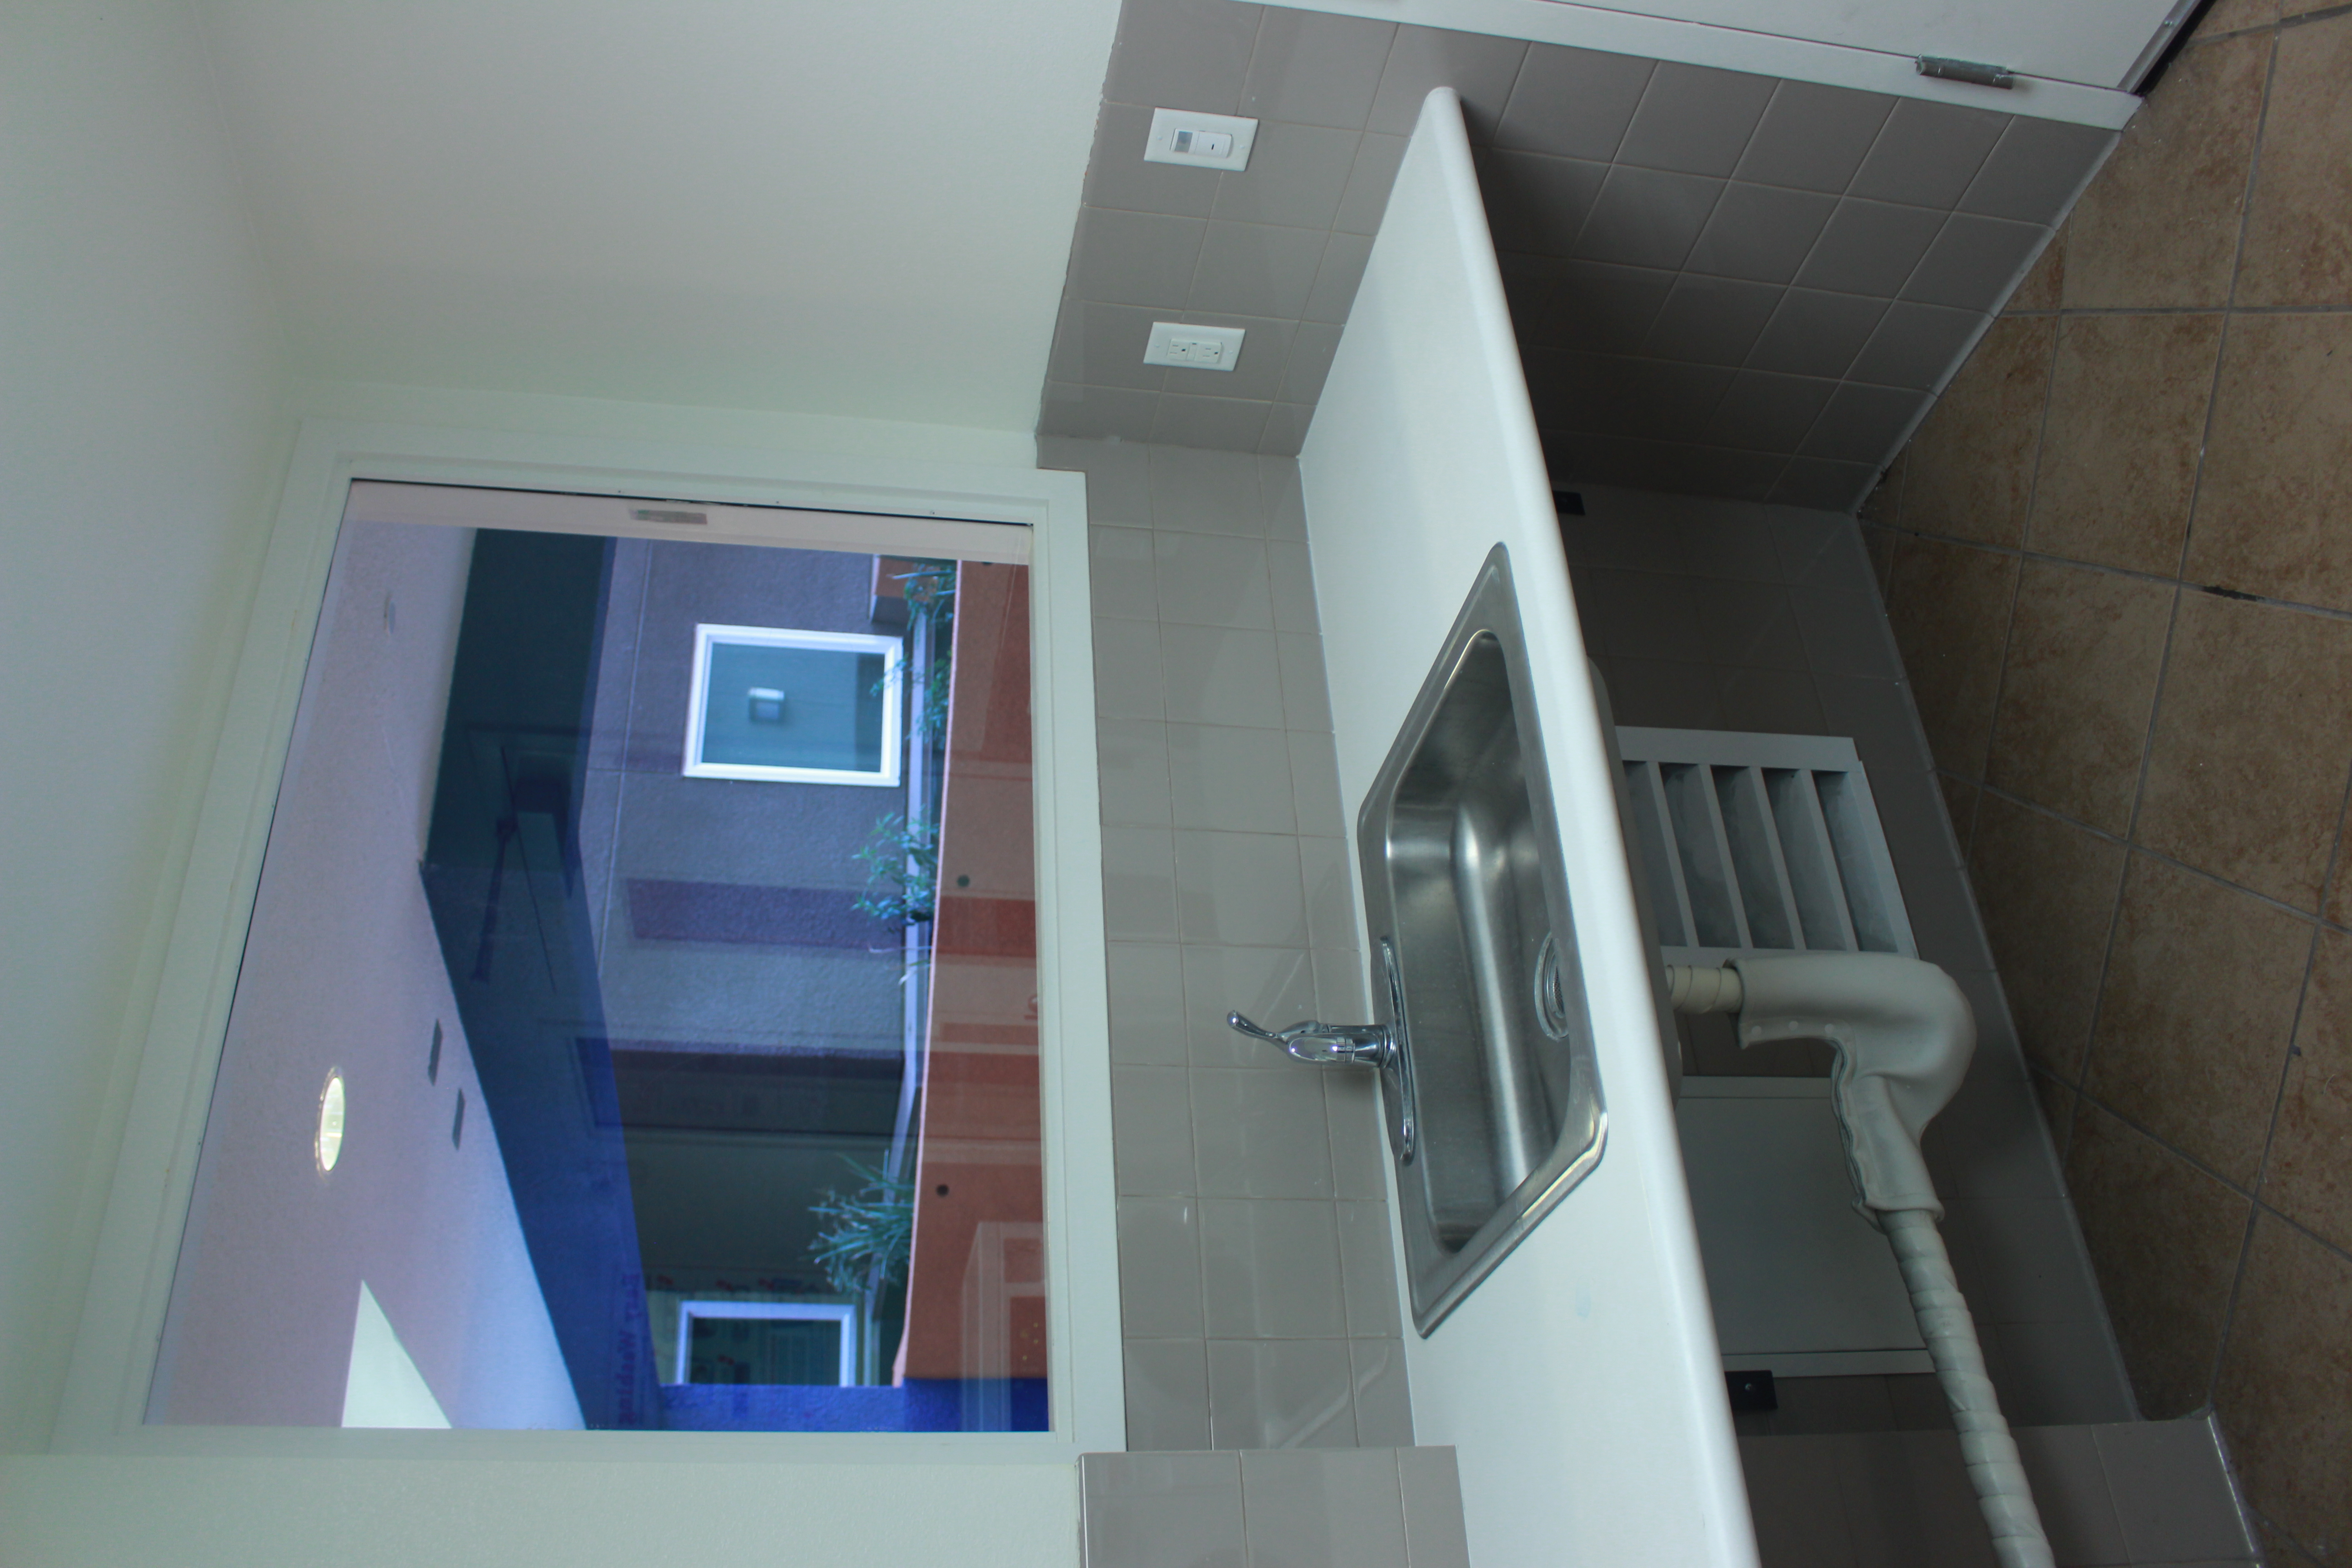 Front view of the laundry stainless steel sink, a see through window, an outlet switch on the right side.